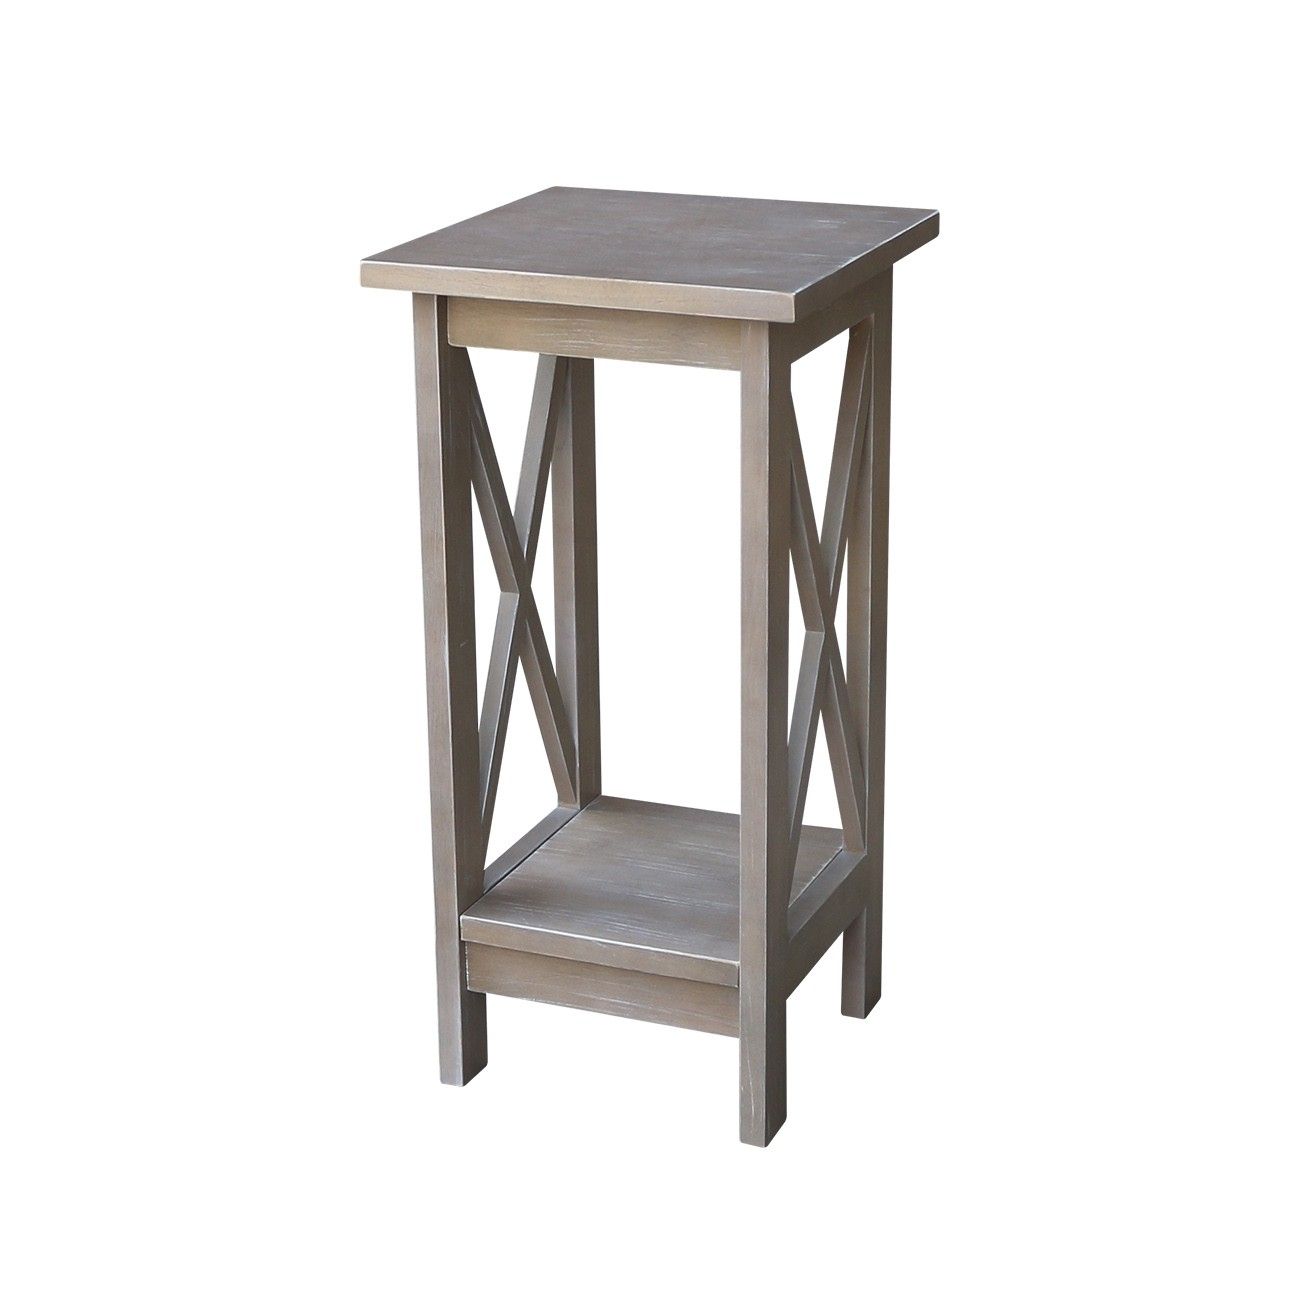 24" X Sided Plant Stand  Weathered Gray (3 Sizes Available) With Regard To Weathered Gray Plant Stands (View 2 of 15)